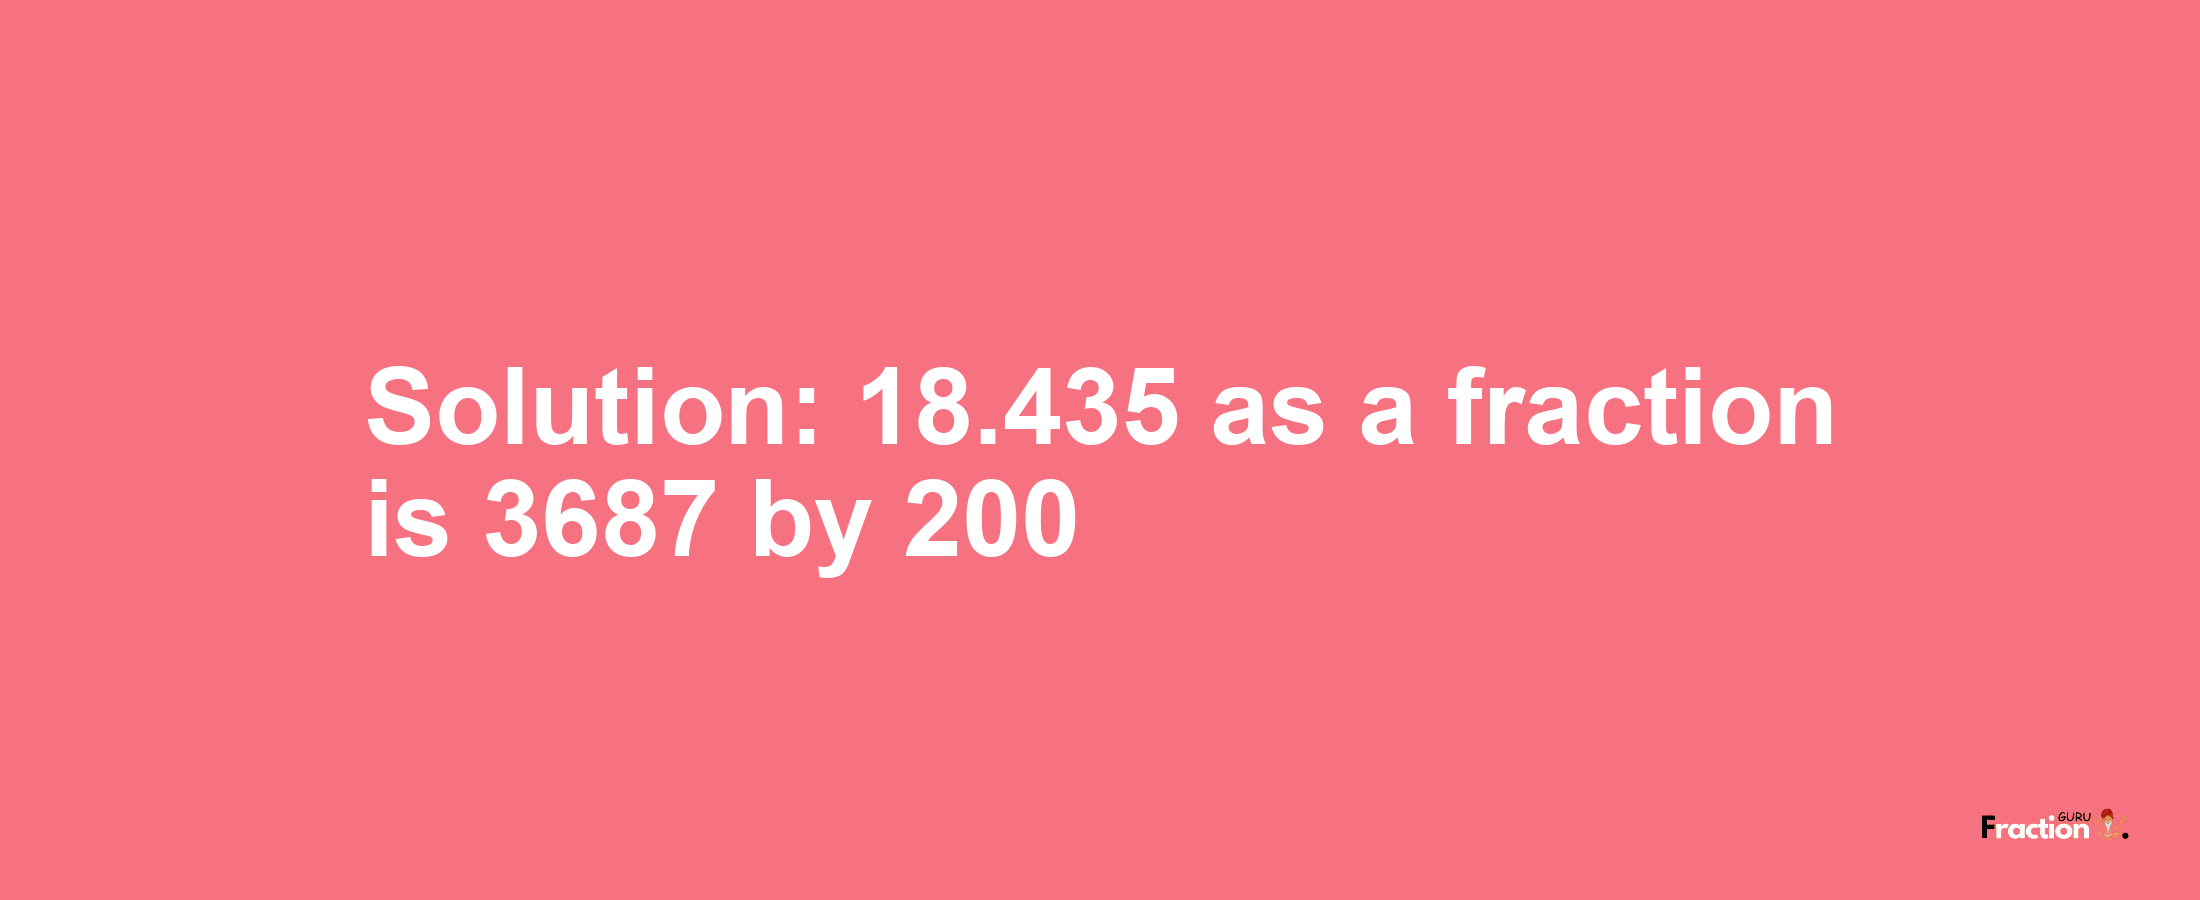 Solution:18.435 as a fraction is 3687/200